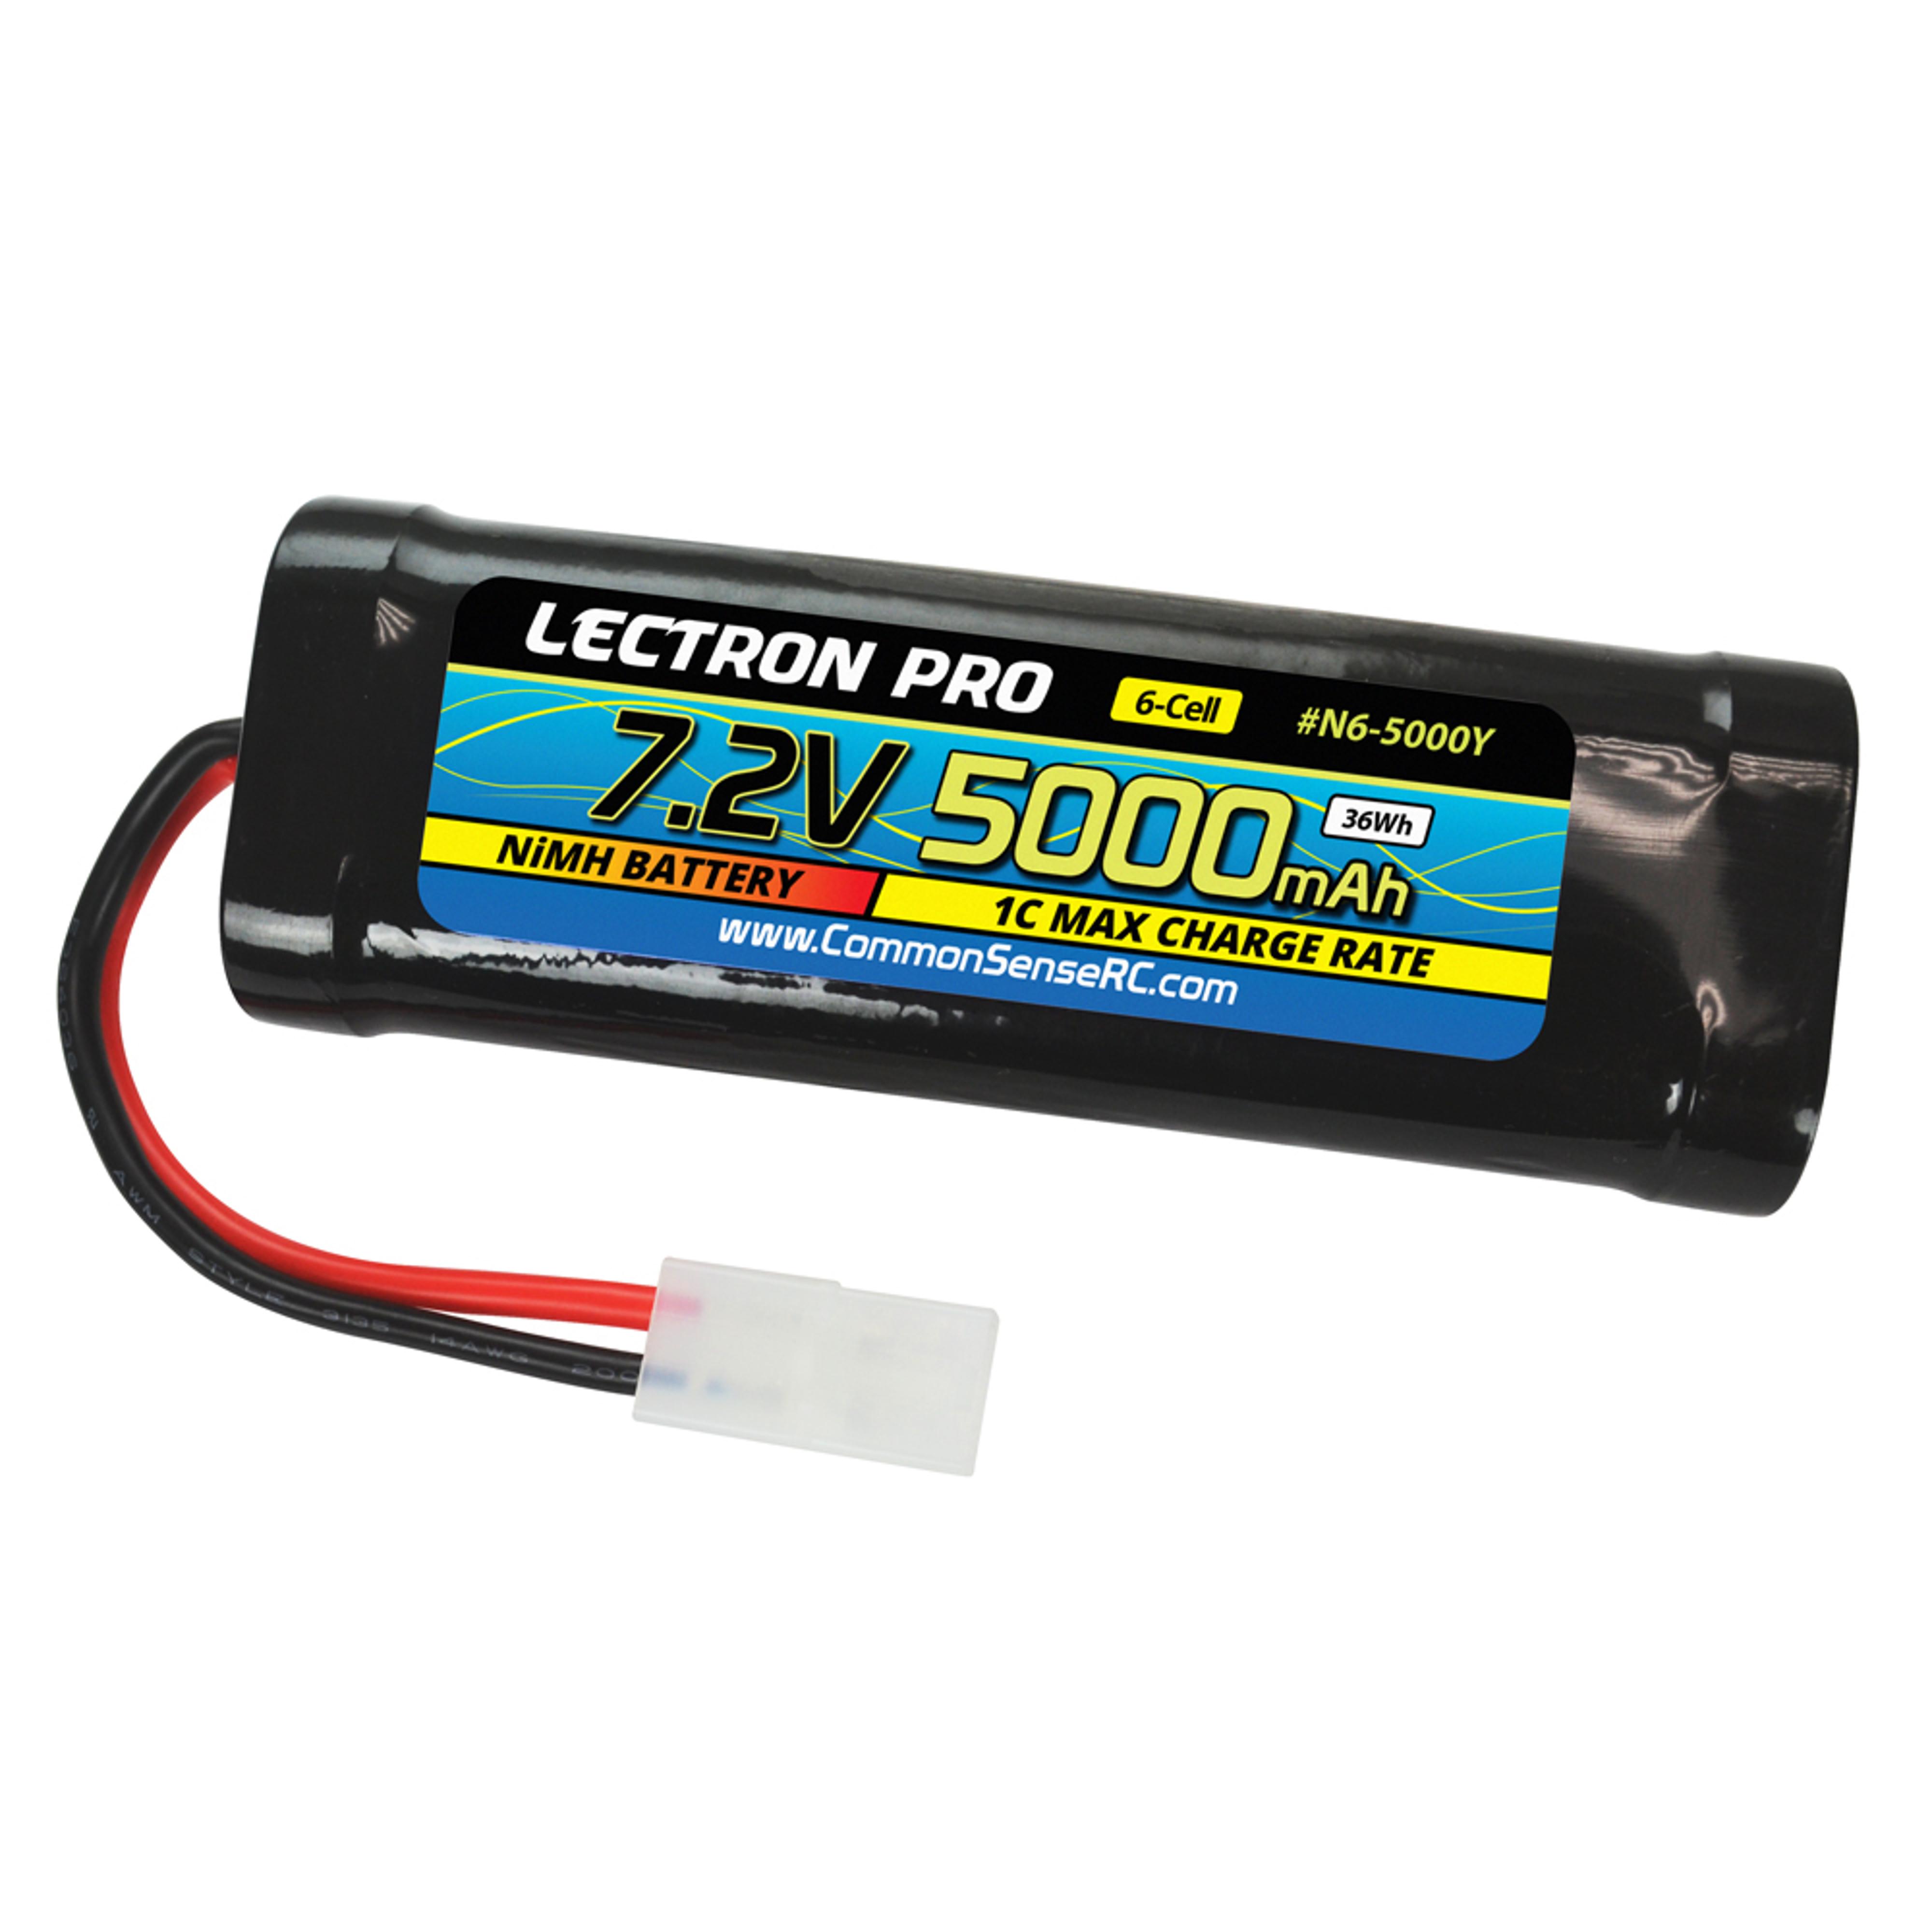 Lectron Pro NiMH 7.2v 6-Cell 5000mAh Flat Pack Battery w/ Tamiya Connector